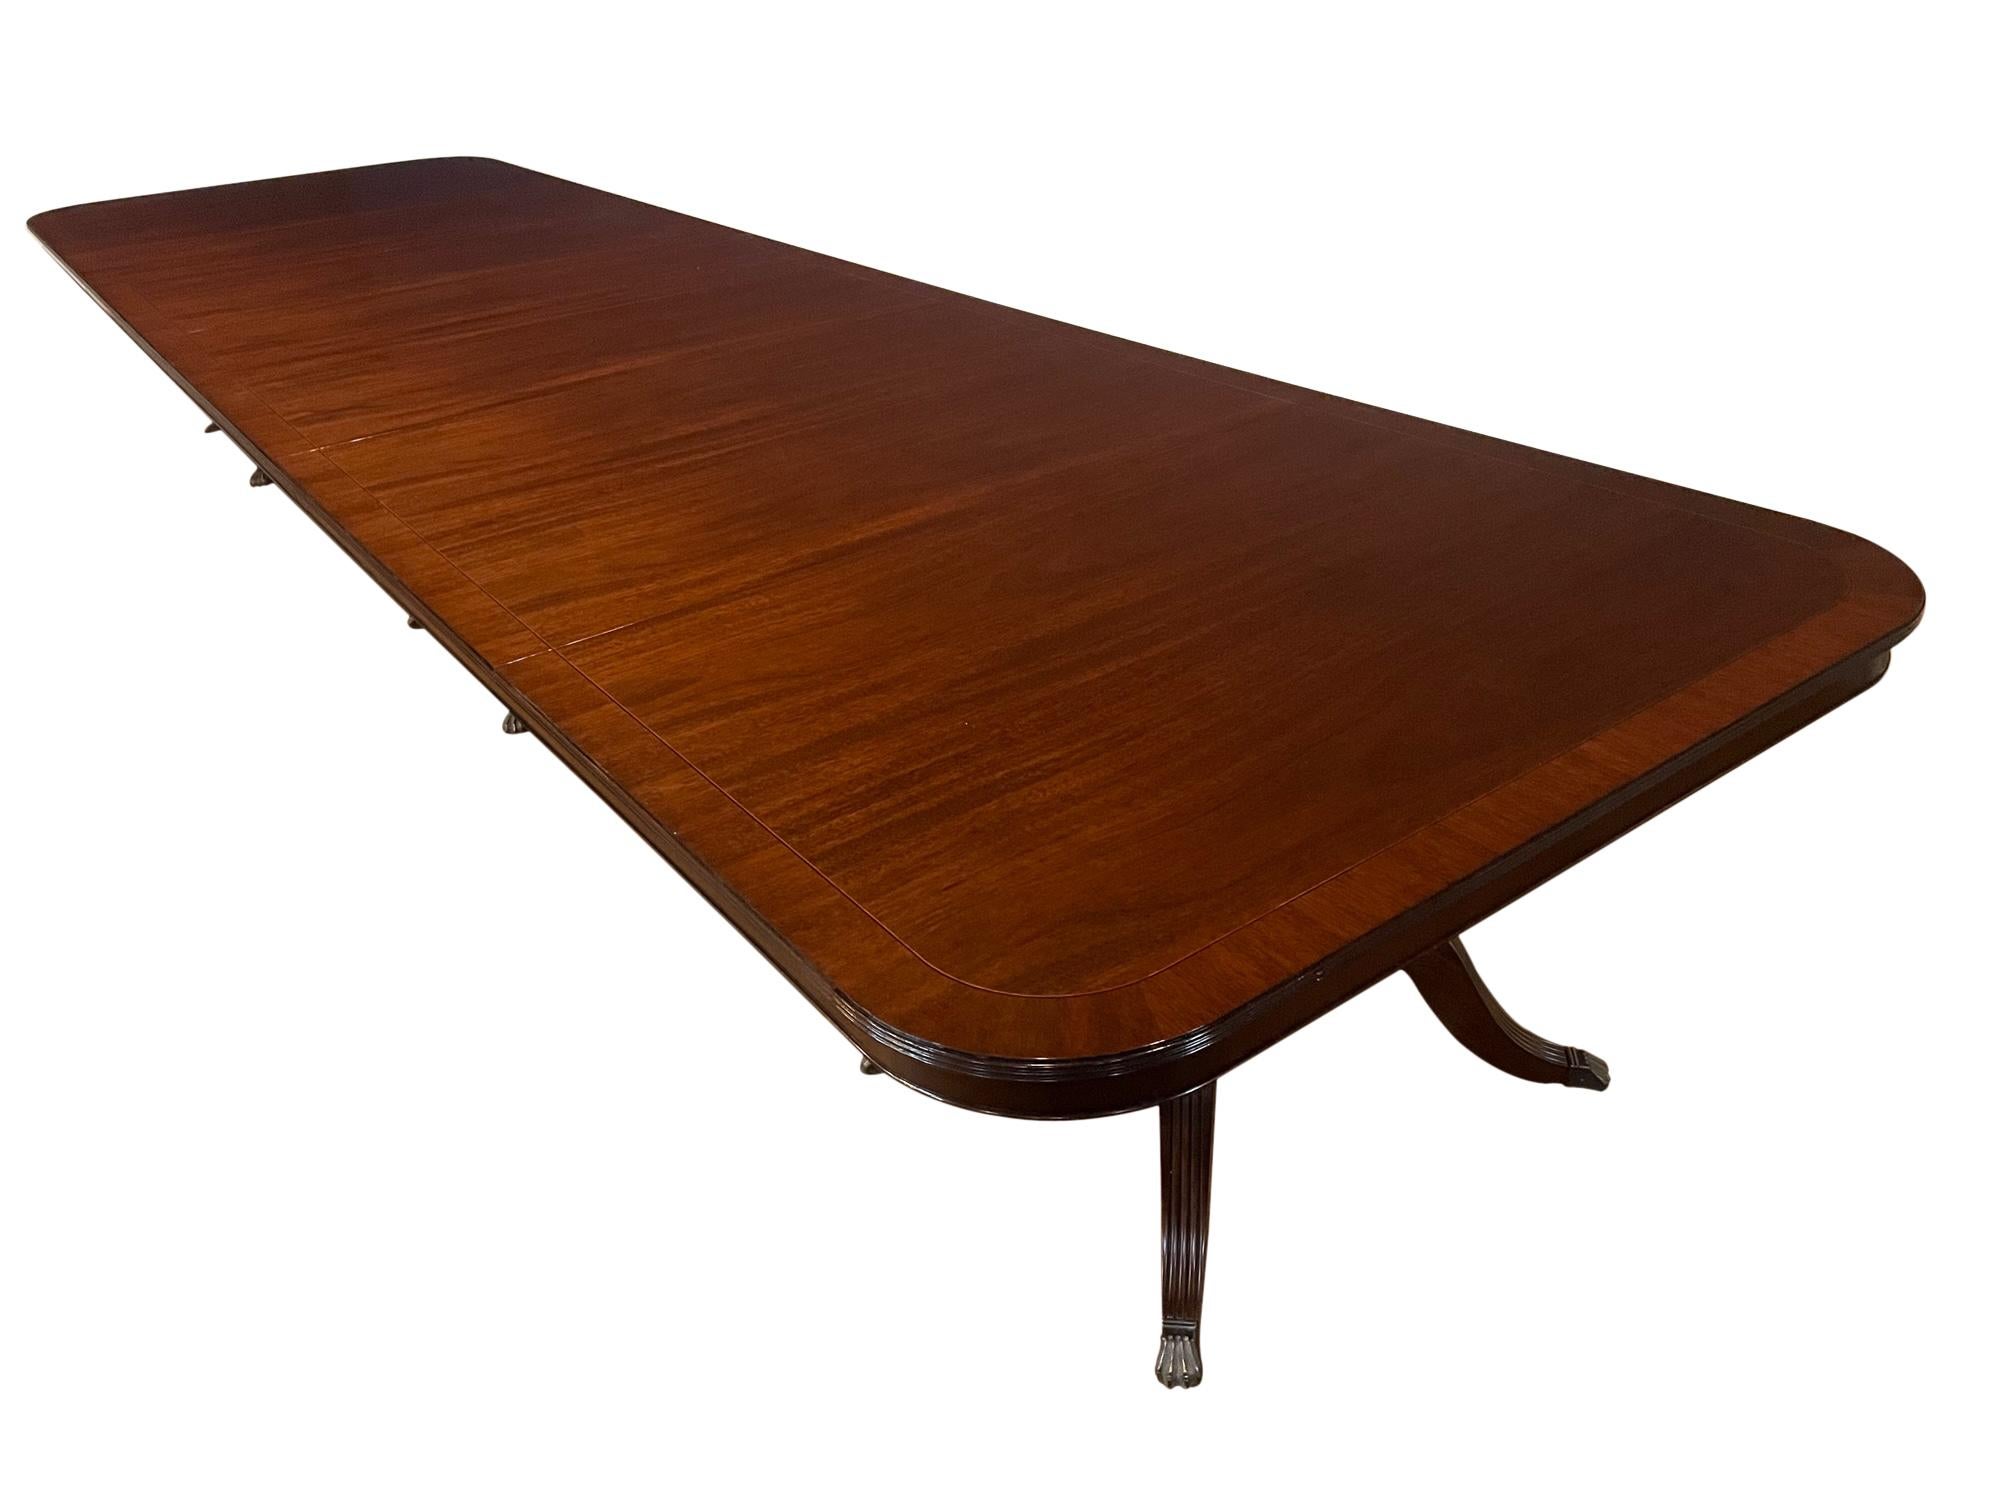 20 ft dining table